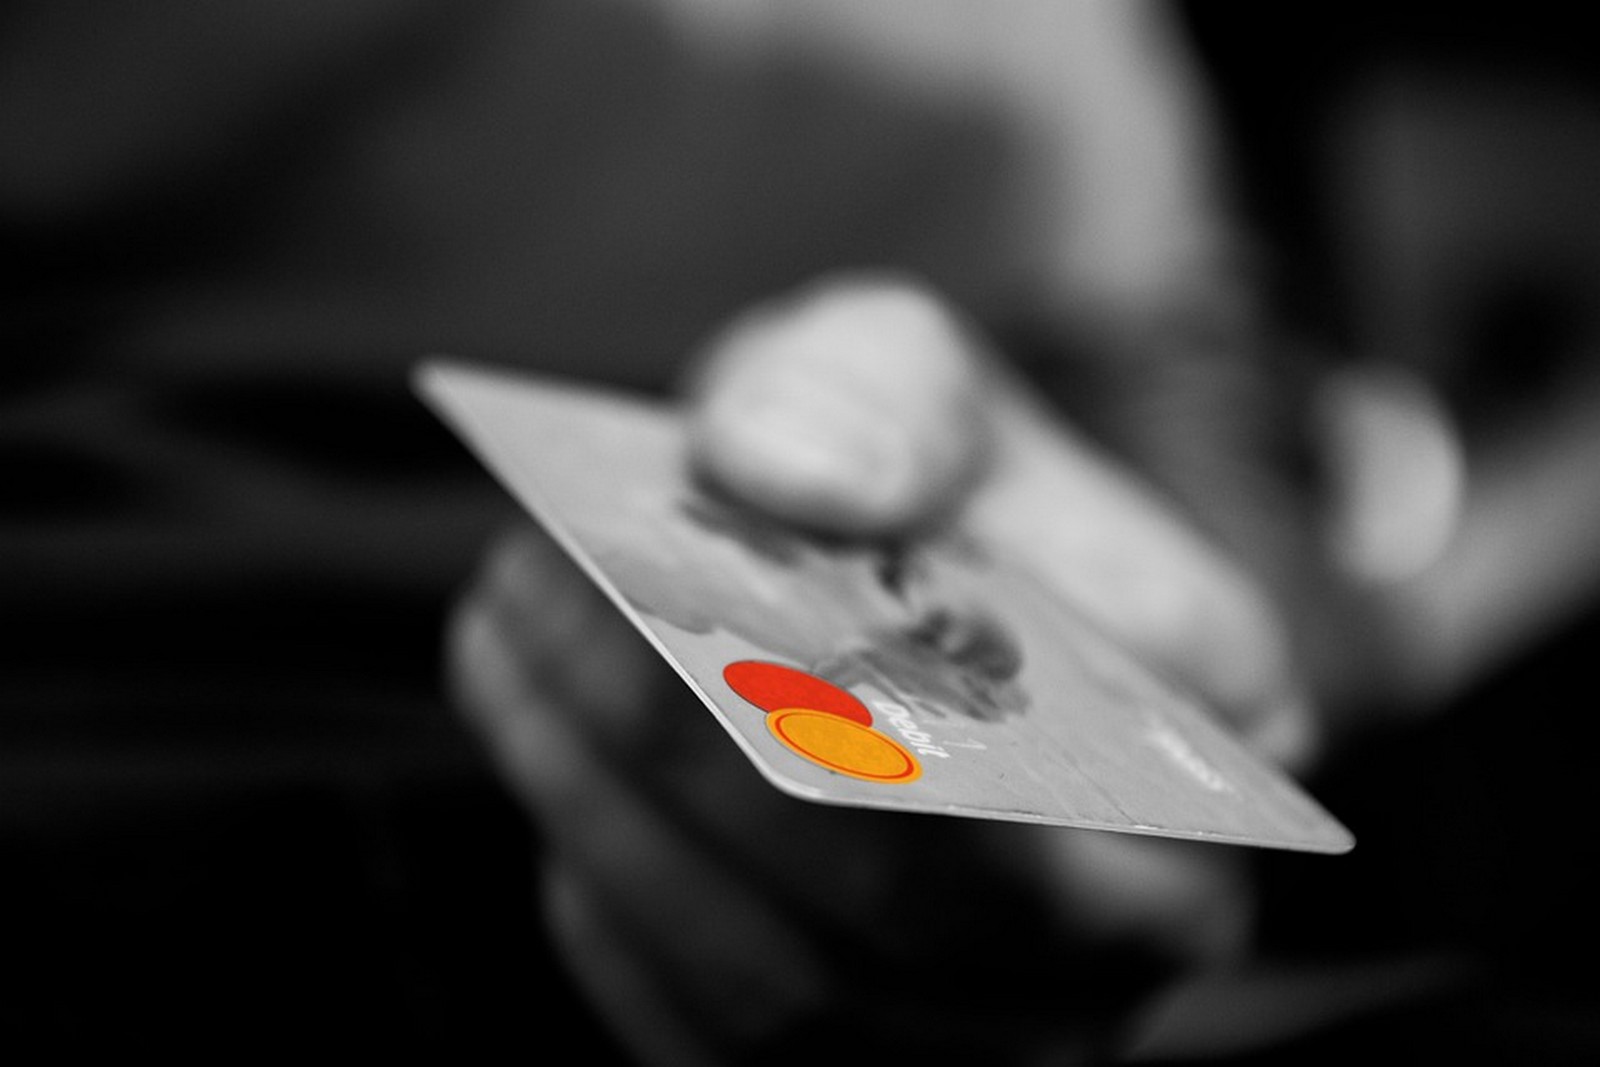 The Best Business Credit Cards For People On Chase 5/24 Ice